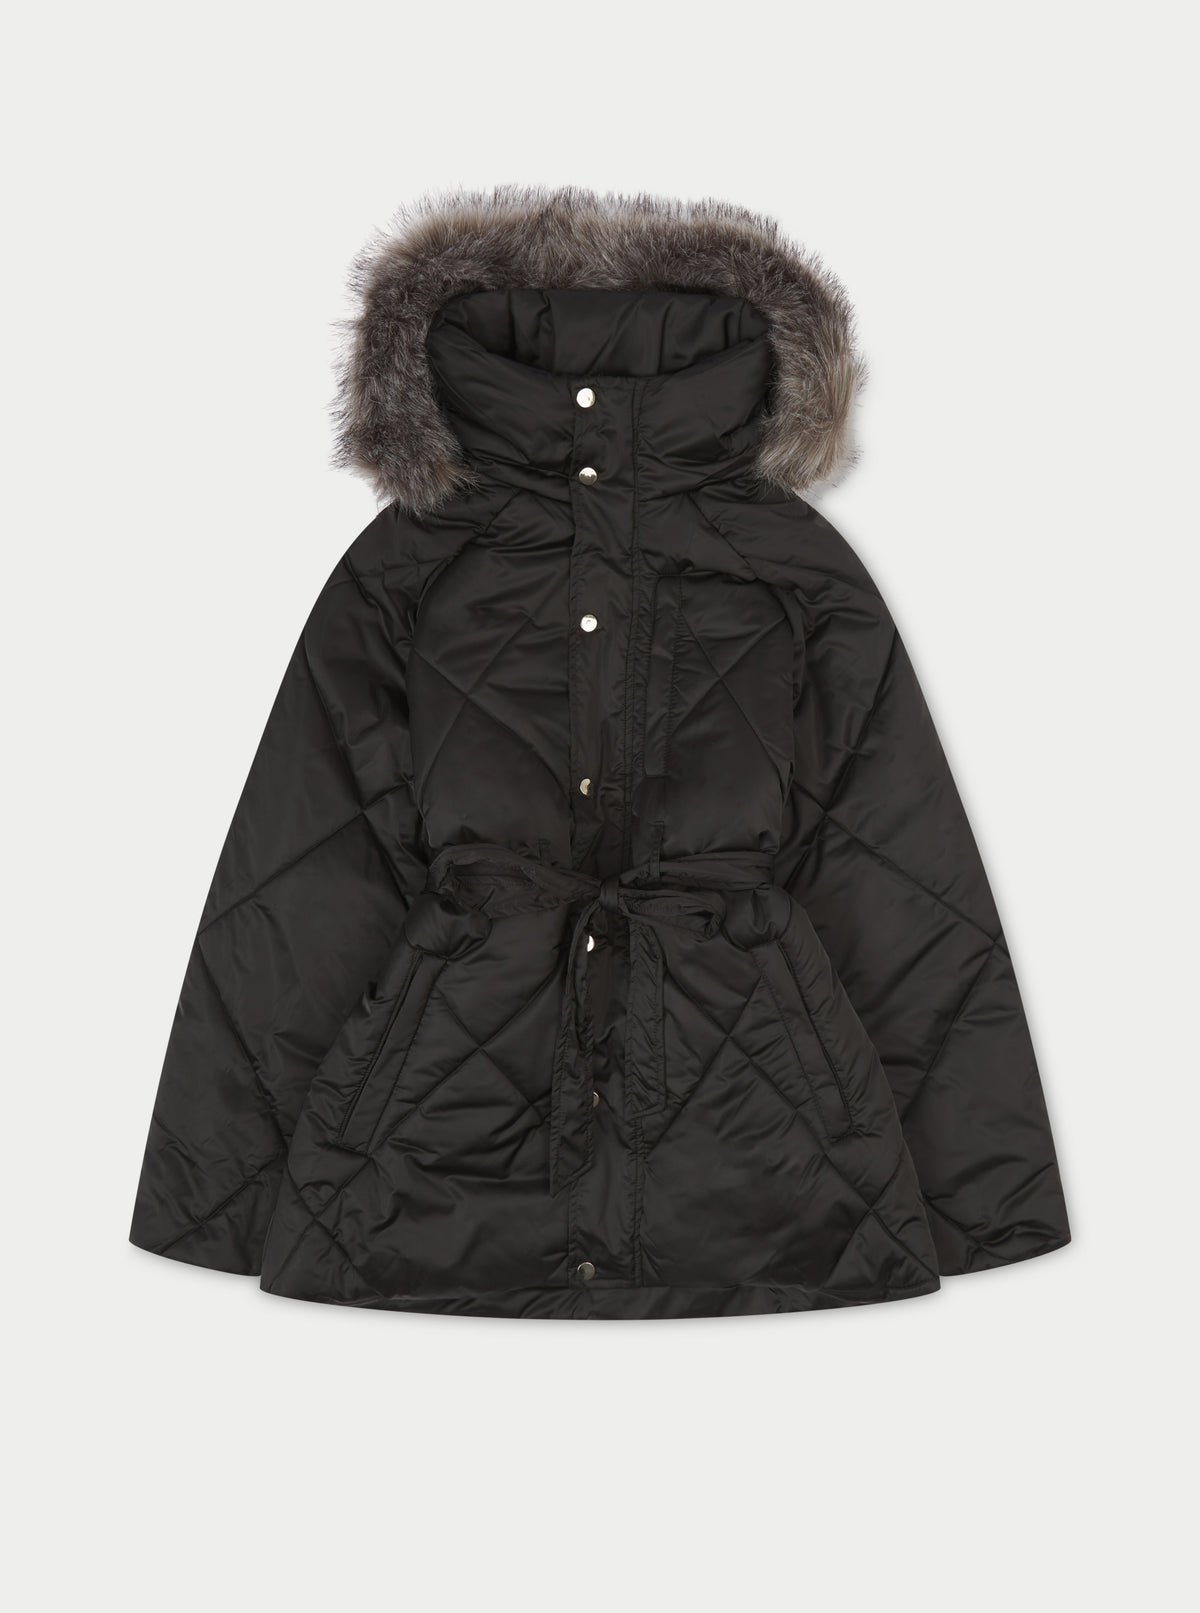 The Couture | Parka Black Fur Hooded Club Jacket Oversize